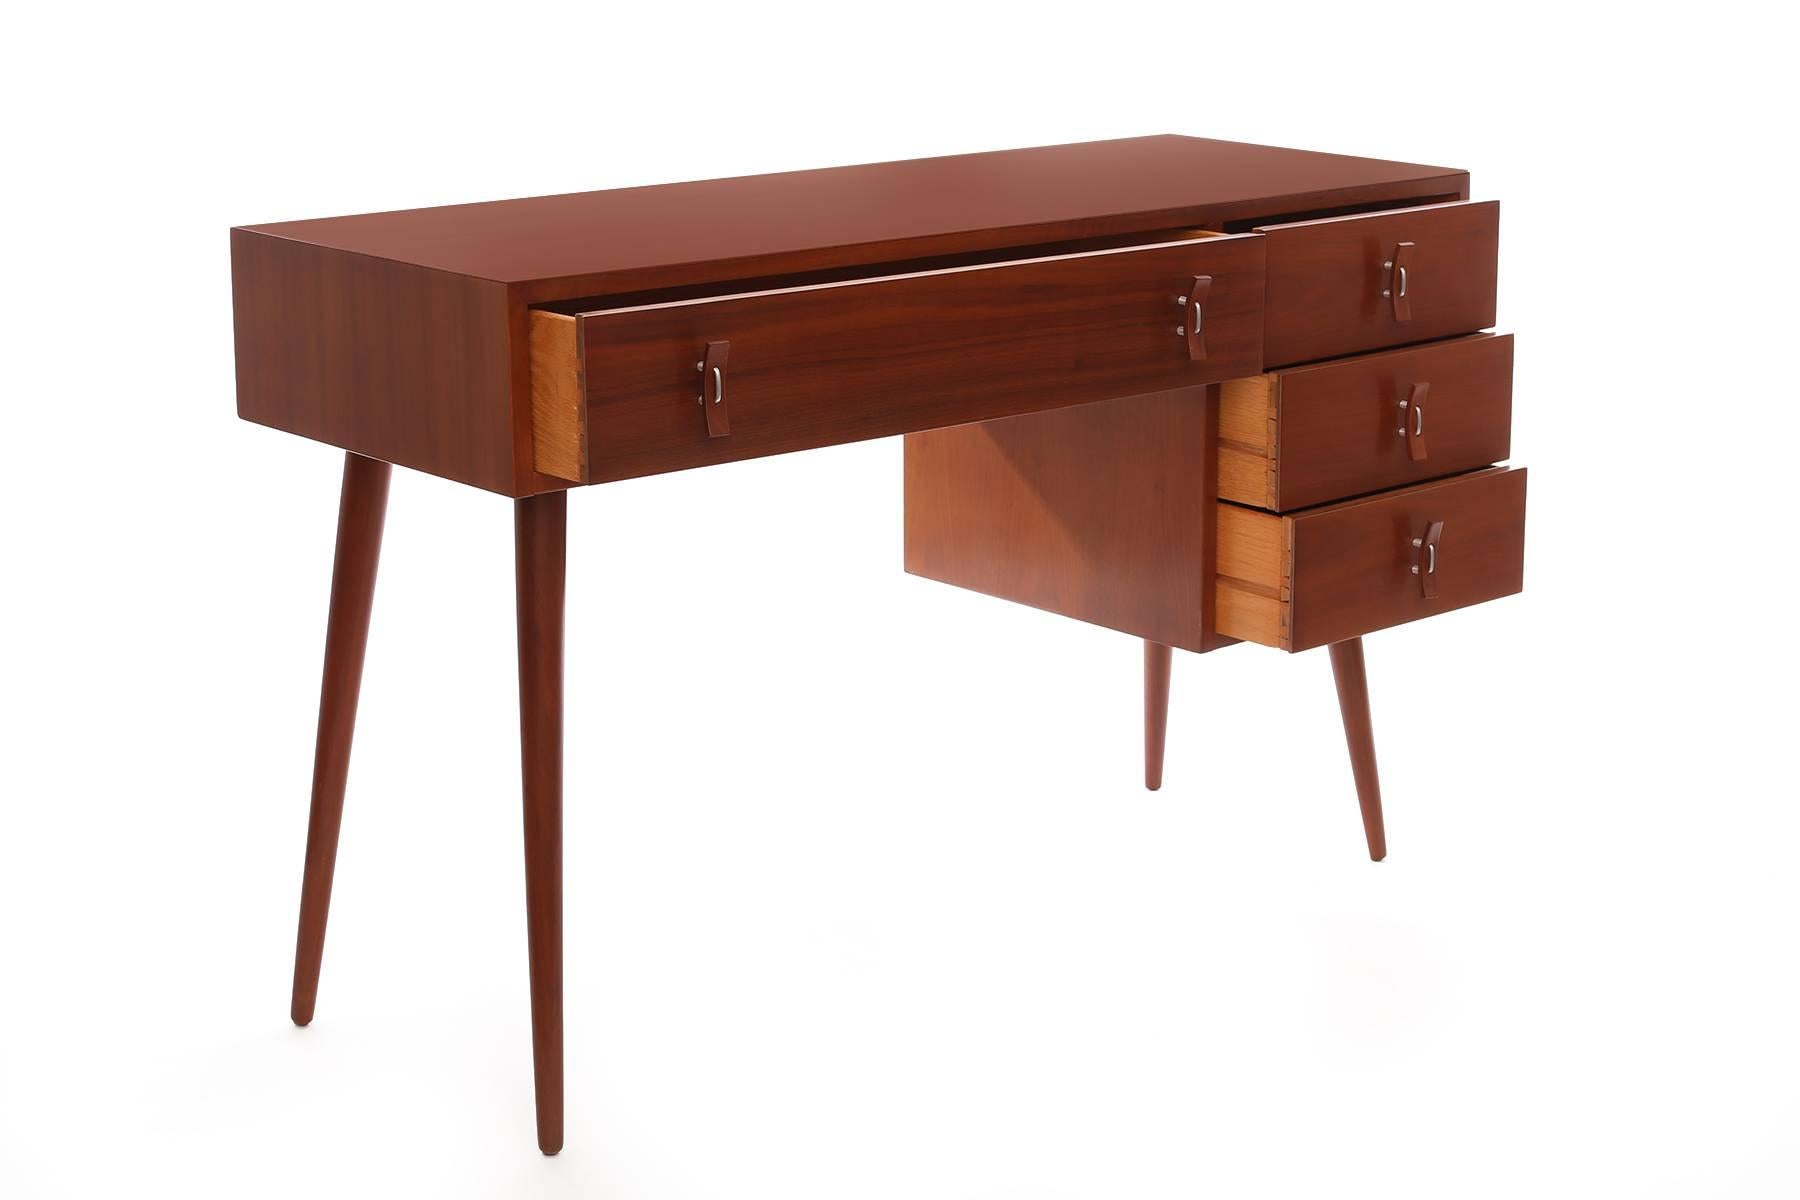 Stanley Young for Glenn of California walnut desk, circa mid-1950s. This lovely example has a beautifully grained walnut top and case, four drawers and bentwood and steel drawer pulls. It has been recently impeccably refinished. Comes with a Greta